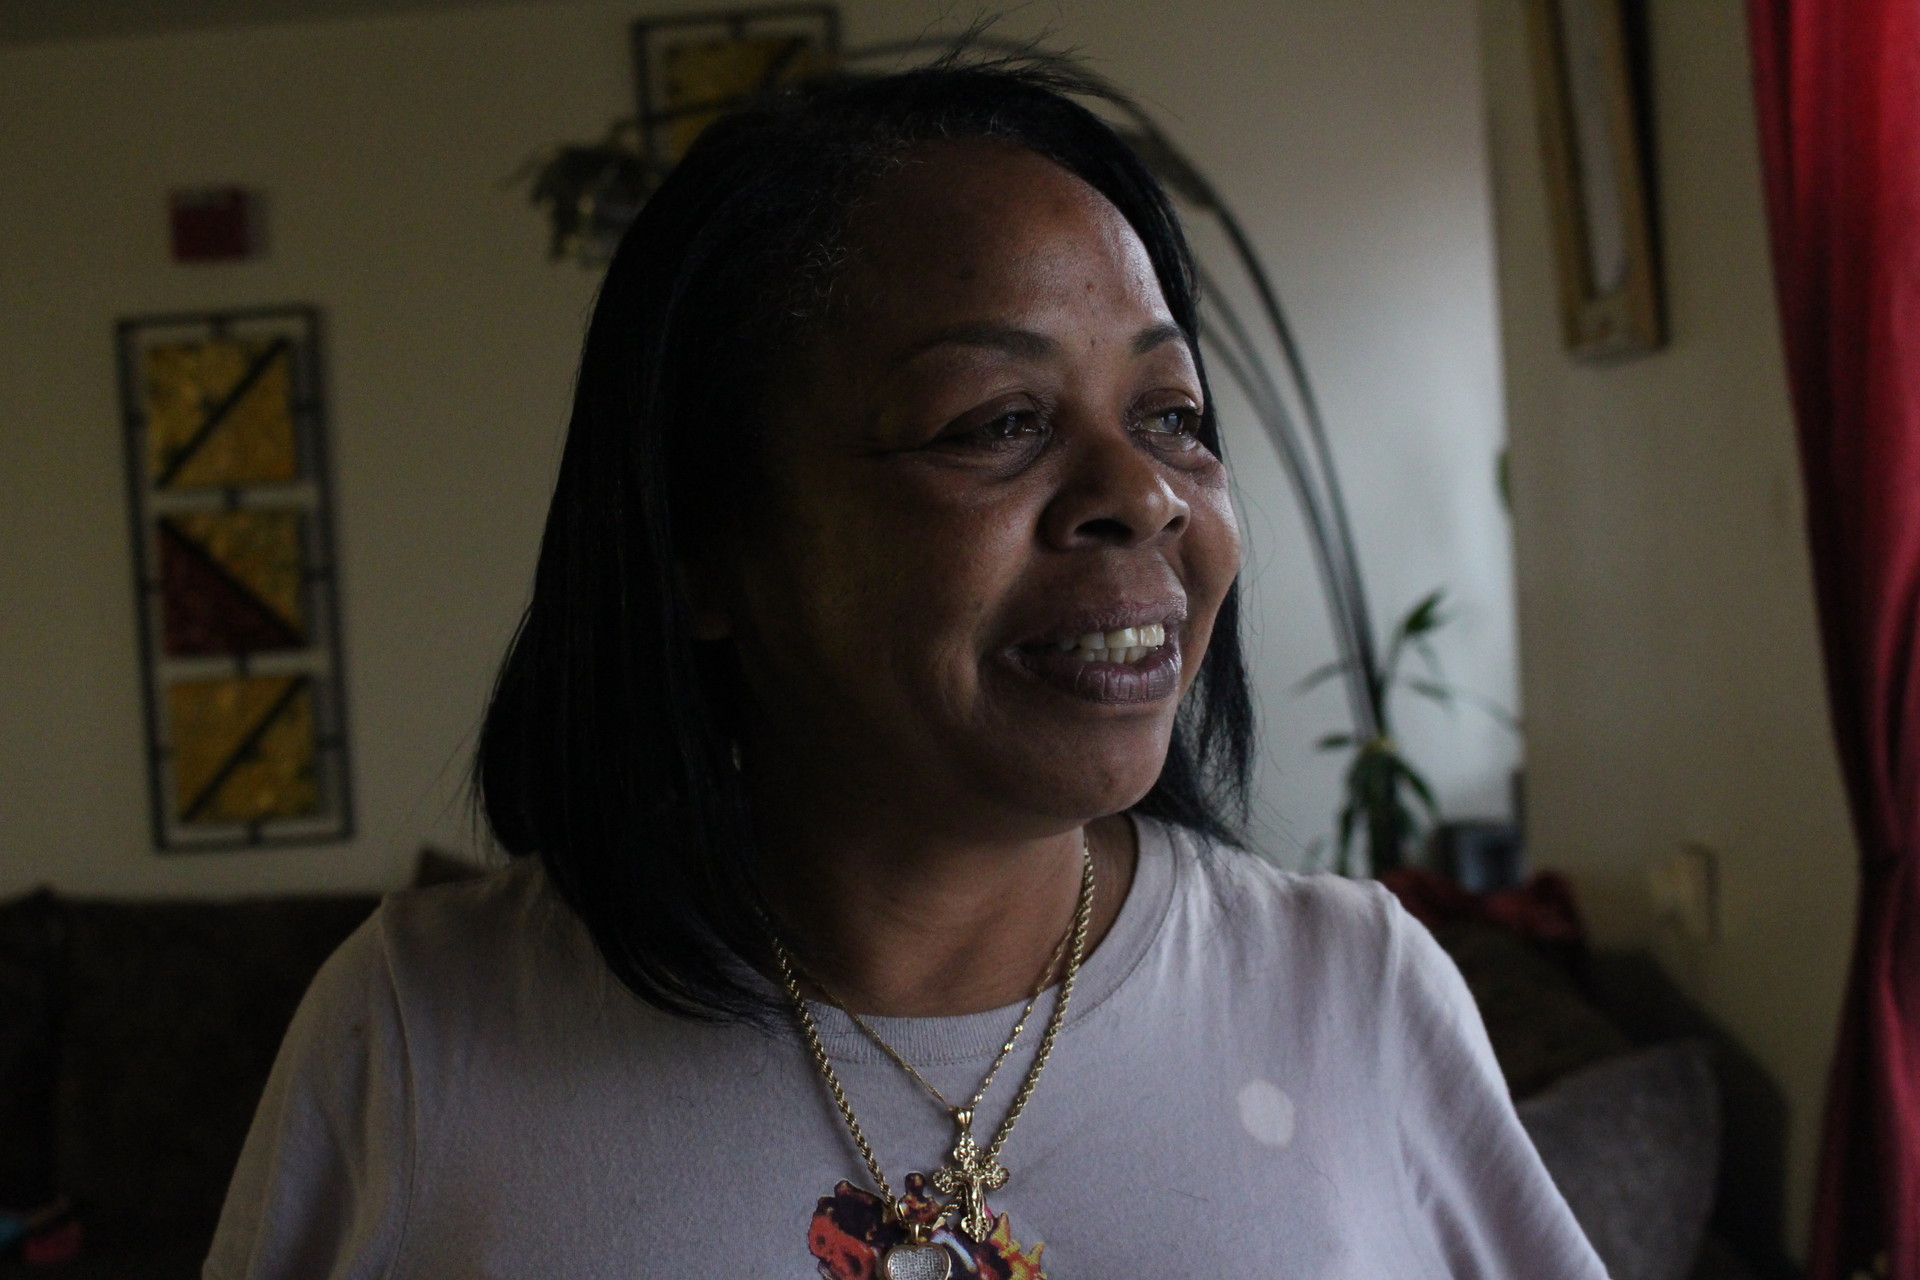 Cassandra Steptoe at the apartment she shares with her 8-year-old granddaughter in San Francisco. She credits The Medea Project with helping her improve her overall well-being.